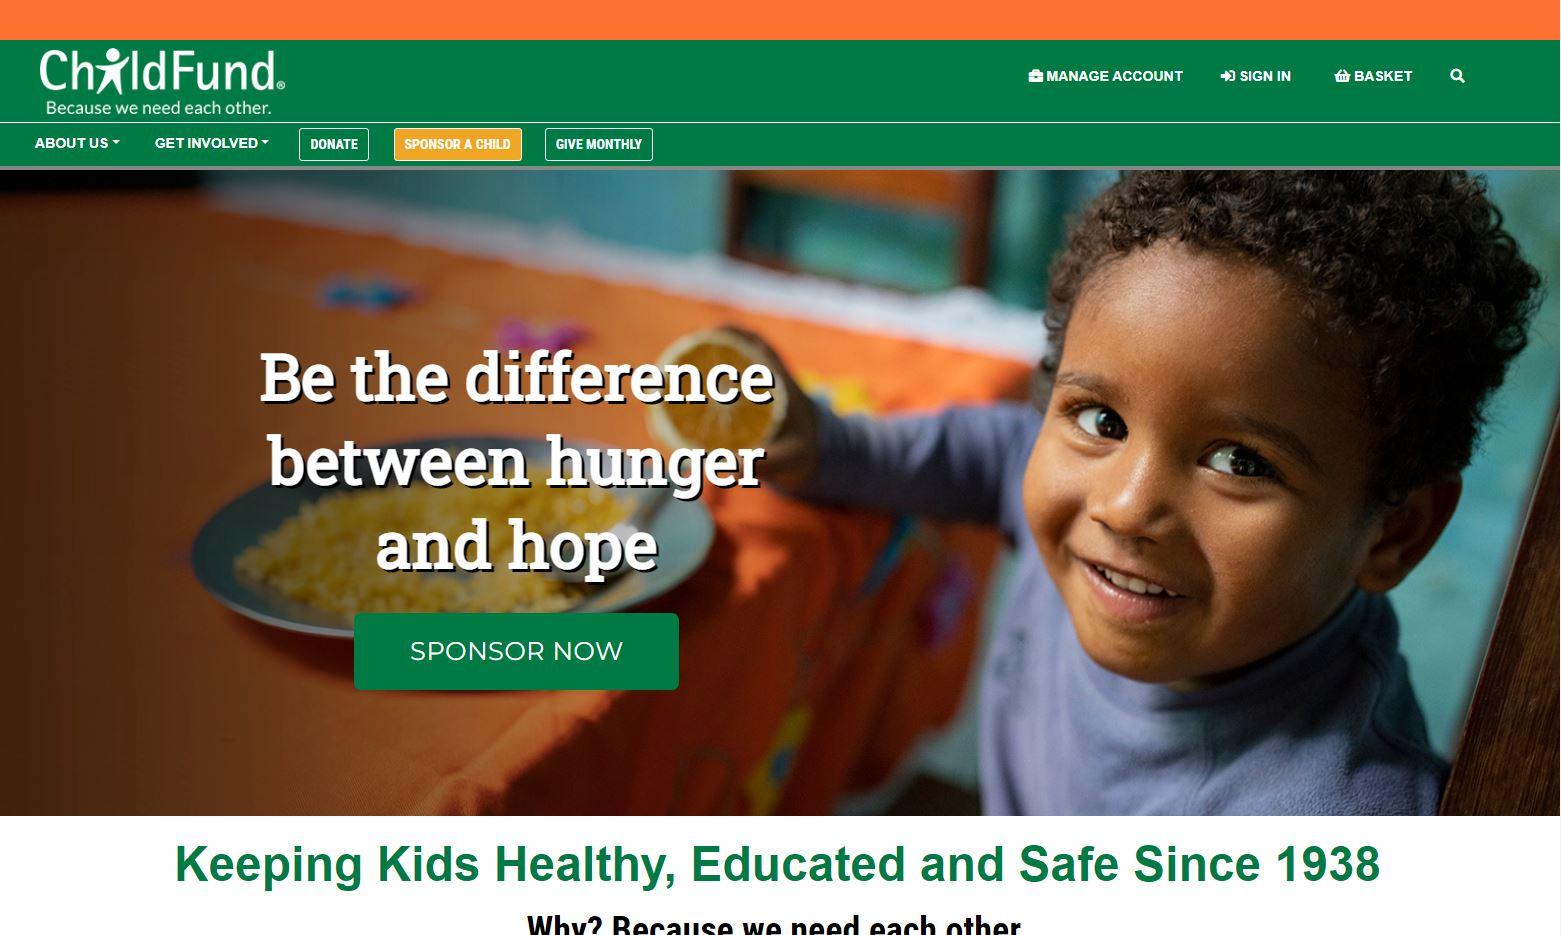 charity website design examples, ChildFund International